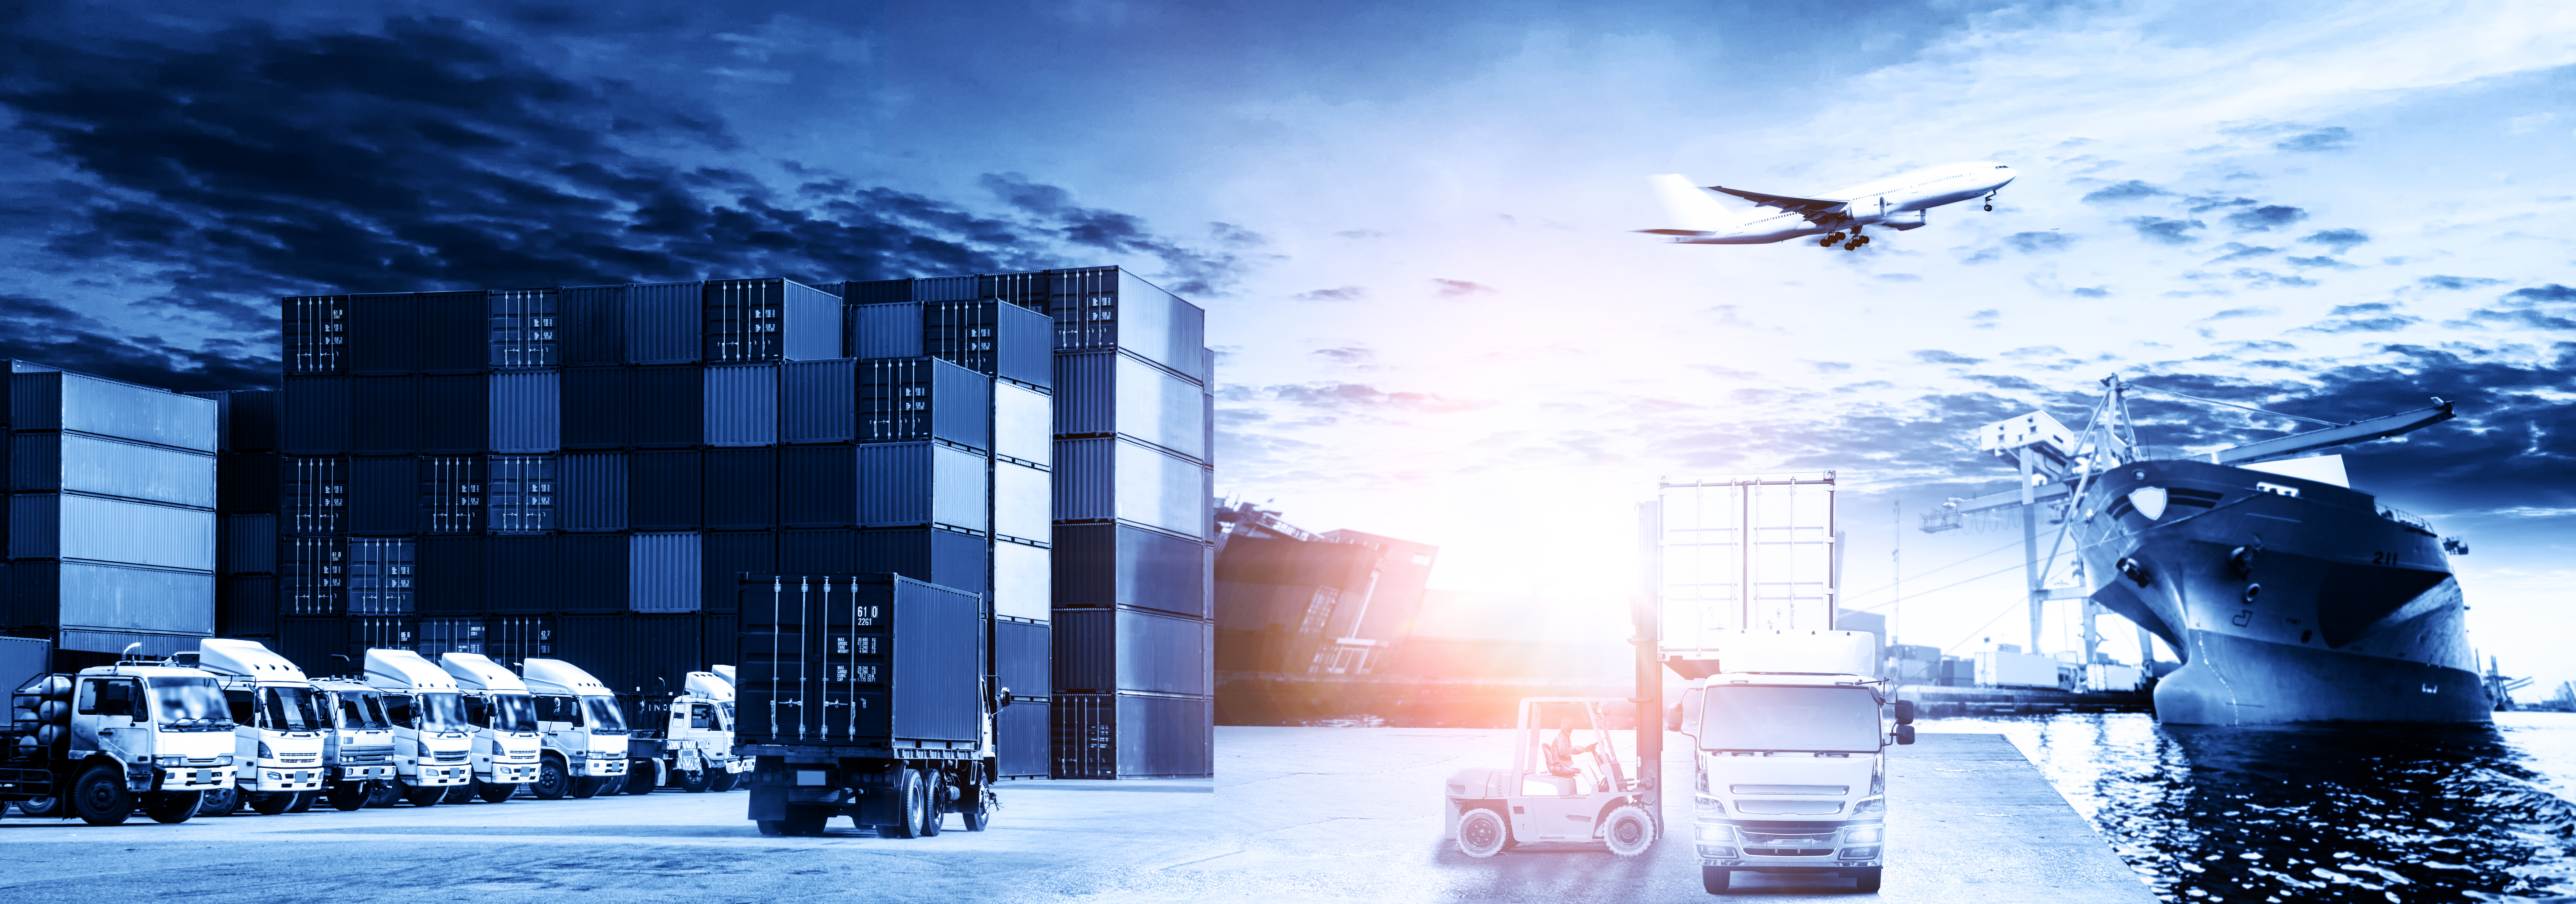 Qatar freight master plan -Industrial Container Cargo freight ship, forklift handling container box loading for logistic import export and transport industry concept backgroundtransport industry background